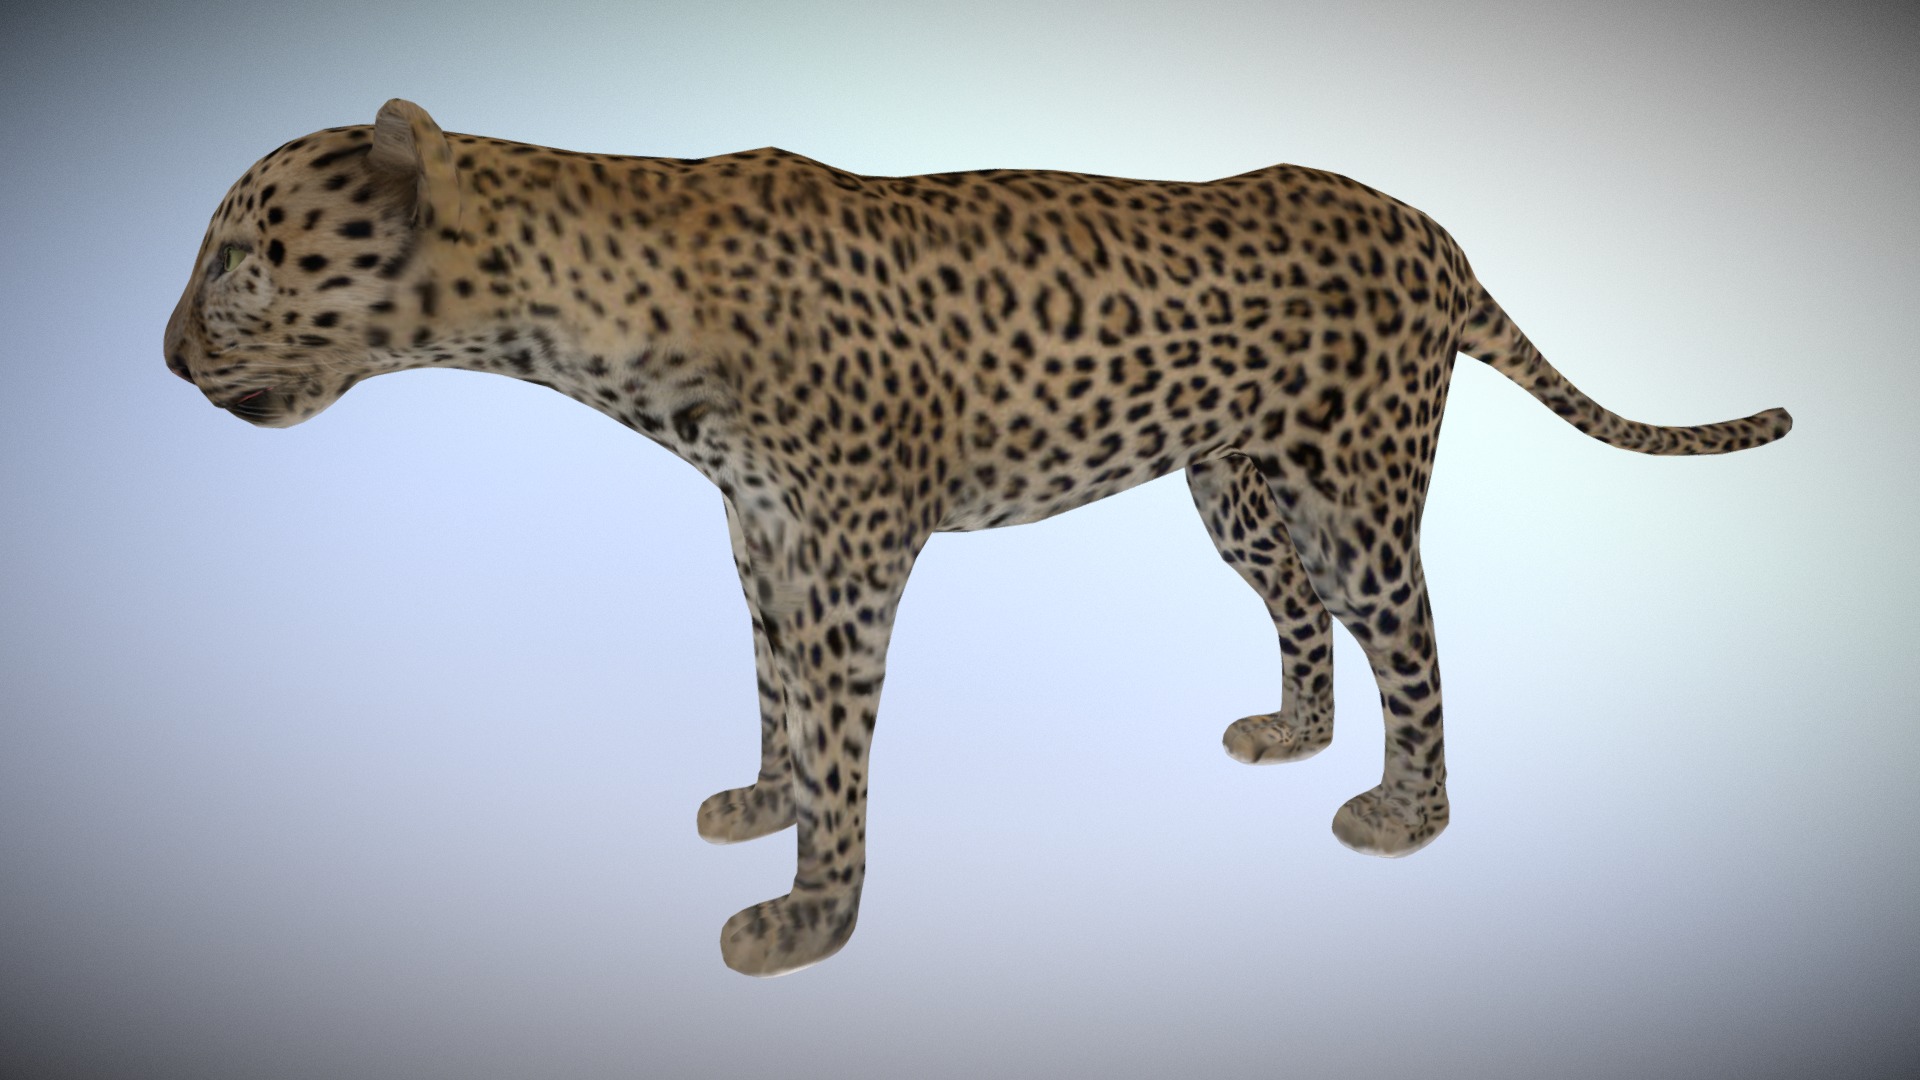 3D model leopard - This is a 3D model of the leopard. The 3D model is about a cheetah walking on a white background.